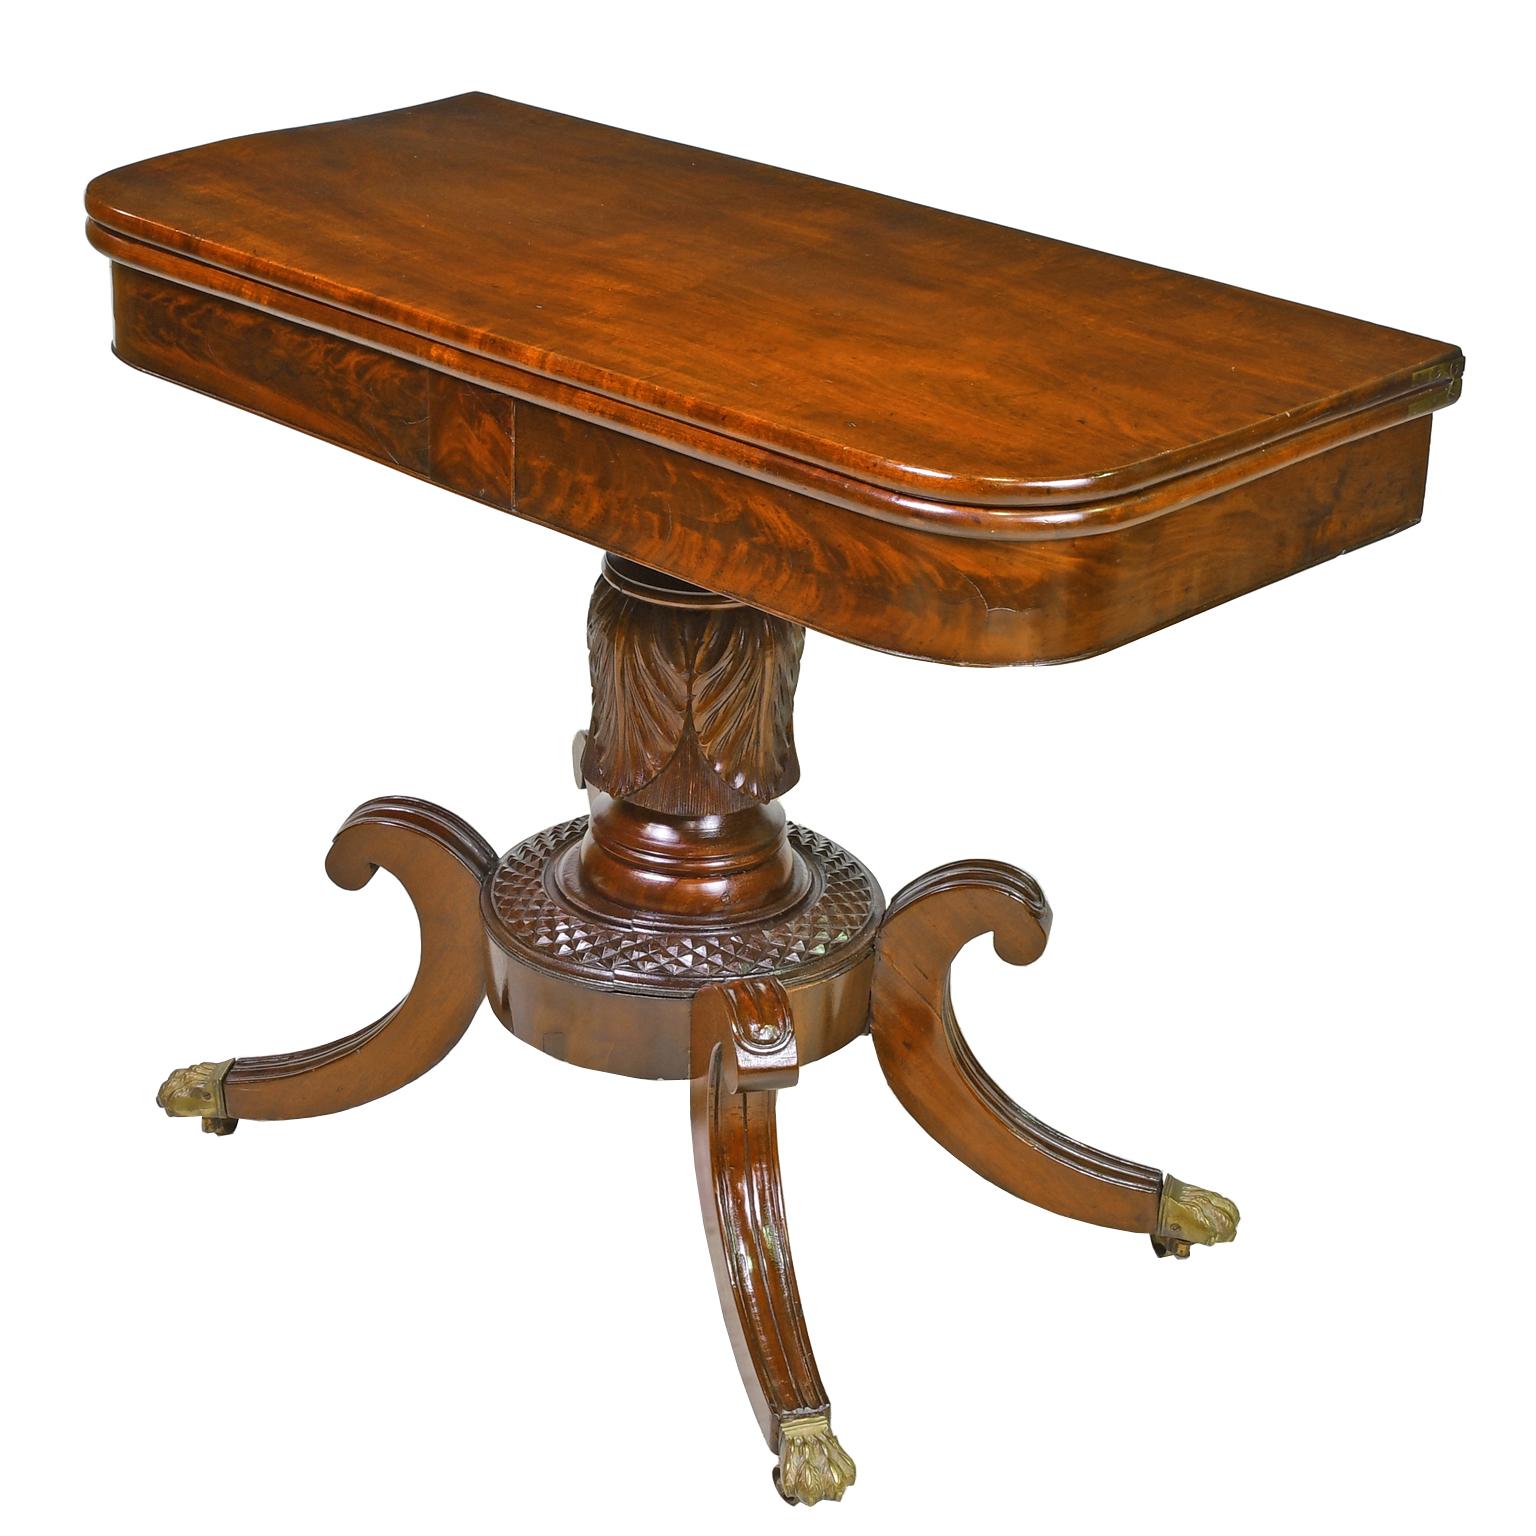 A lovely Federal card table in fine mahogany with hinged rectangular top pivoting and opening to a square supported by a turned column with tobacco leaf carvings over a round base with carved knurling reminiscent of pineapples. Four 